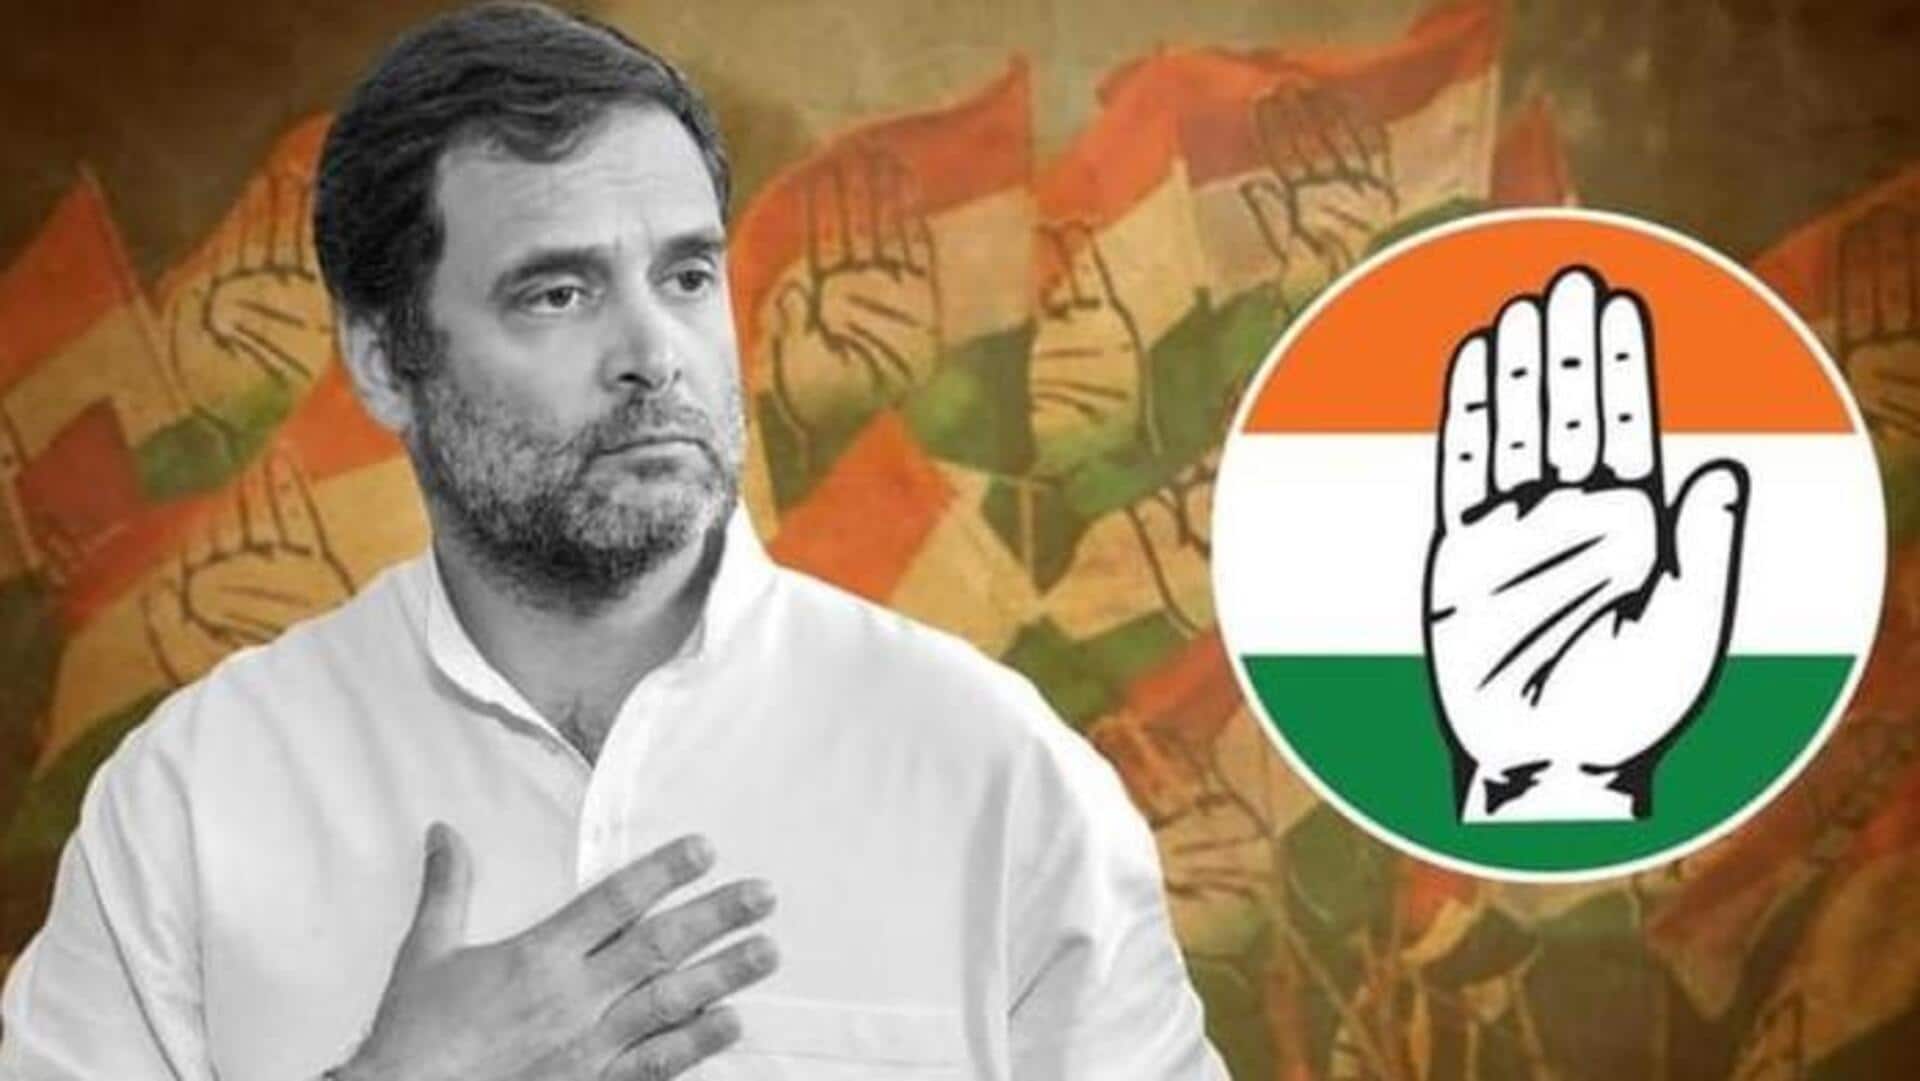 Congress to launch crowdfunding campaign ahead of Lok Sabha elections